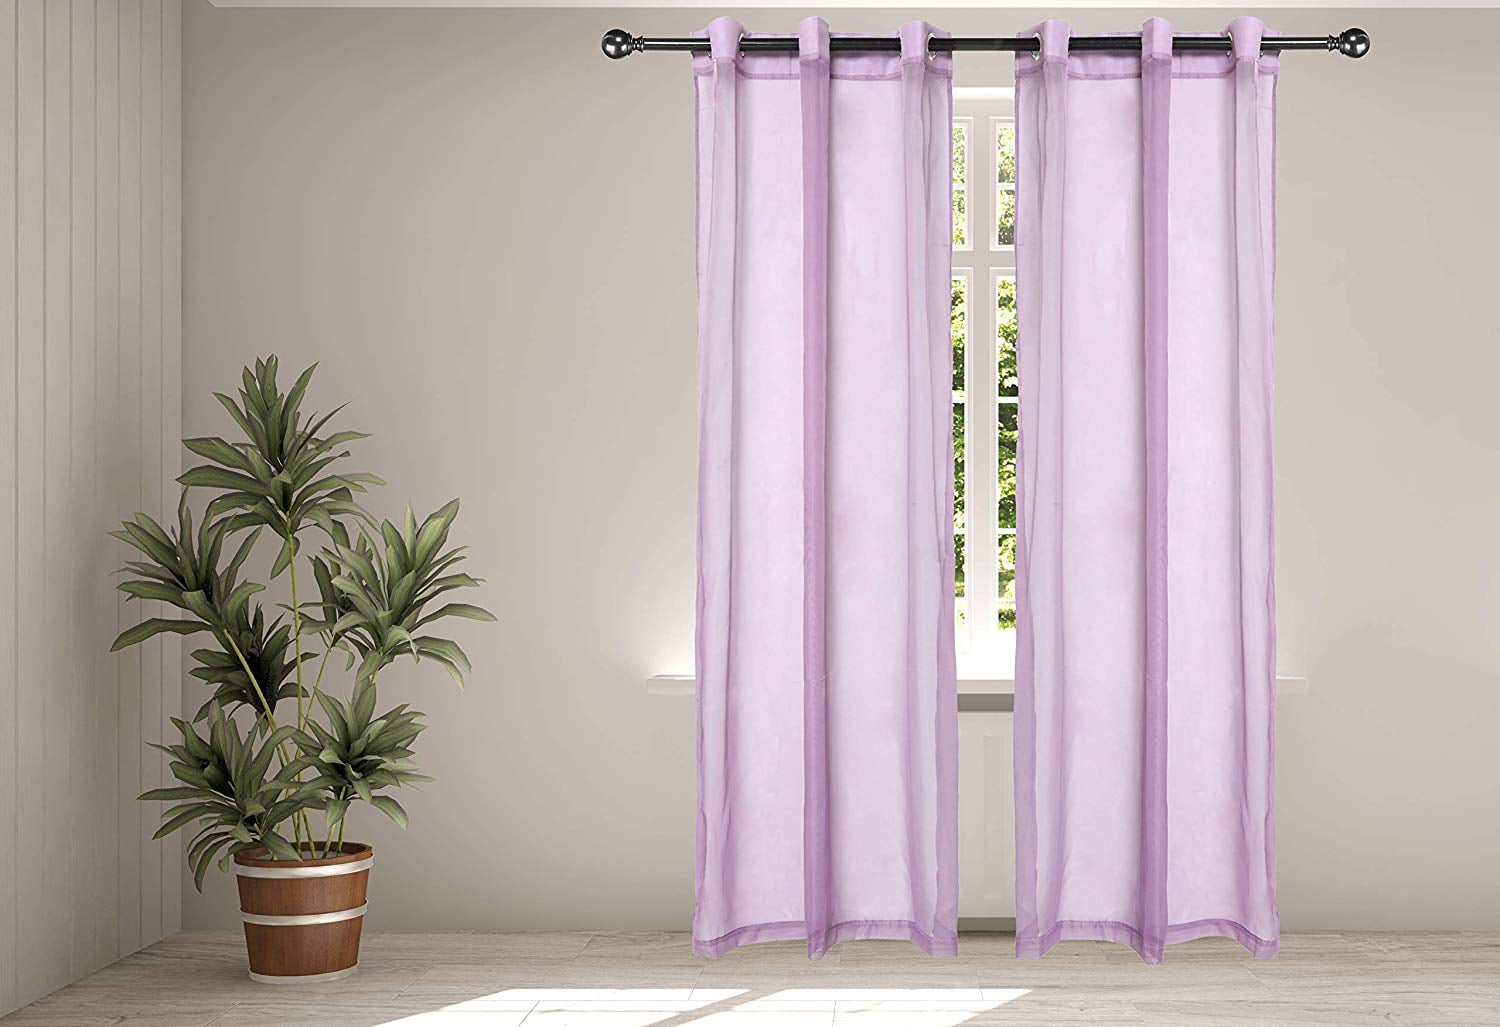 Details about   Legacy Kid Decor Chiffon Window Sheer Curtains 2 Panels Dots 54x63” Lavender! 